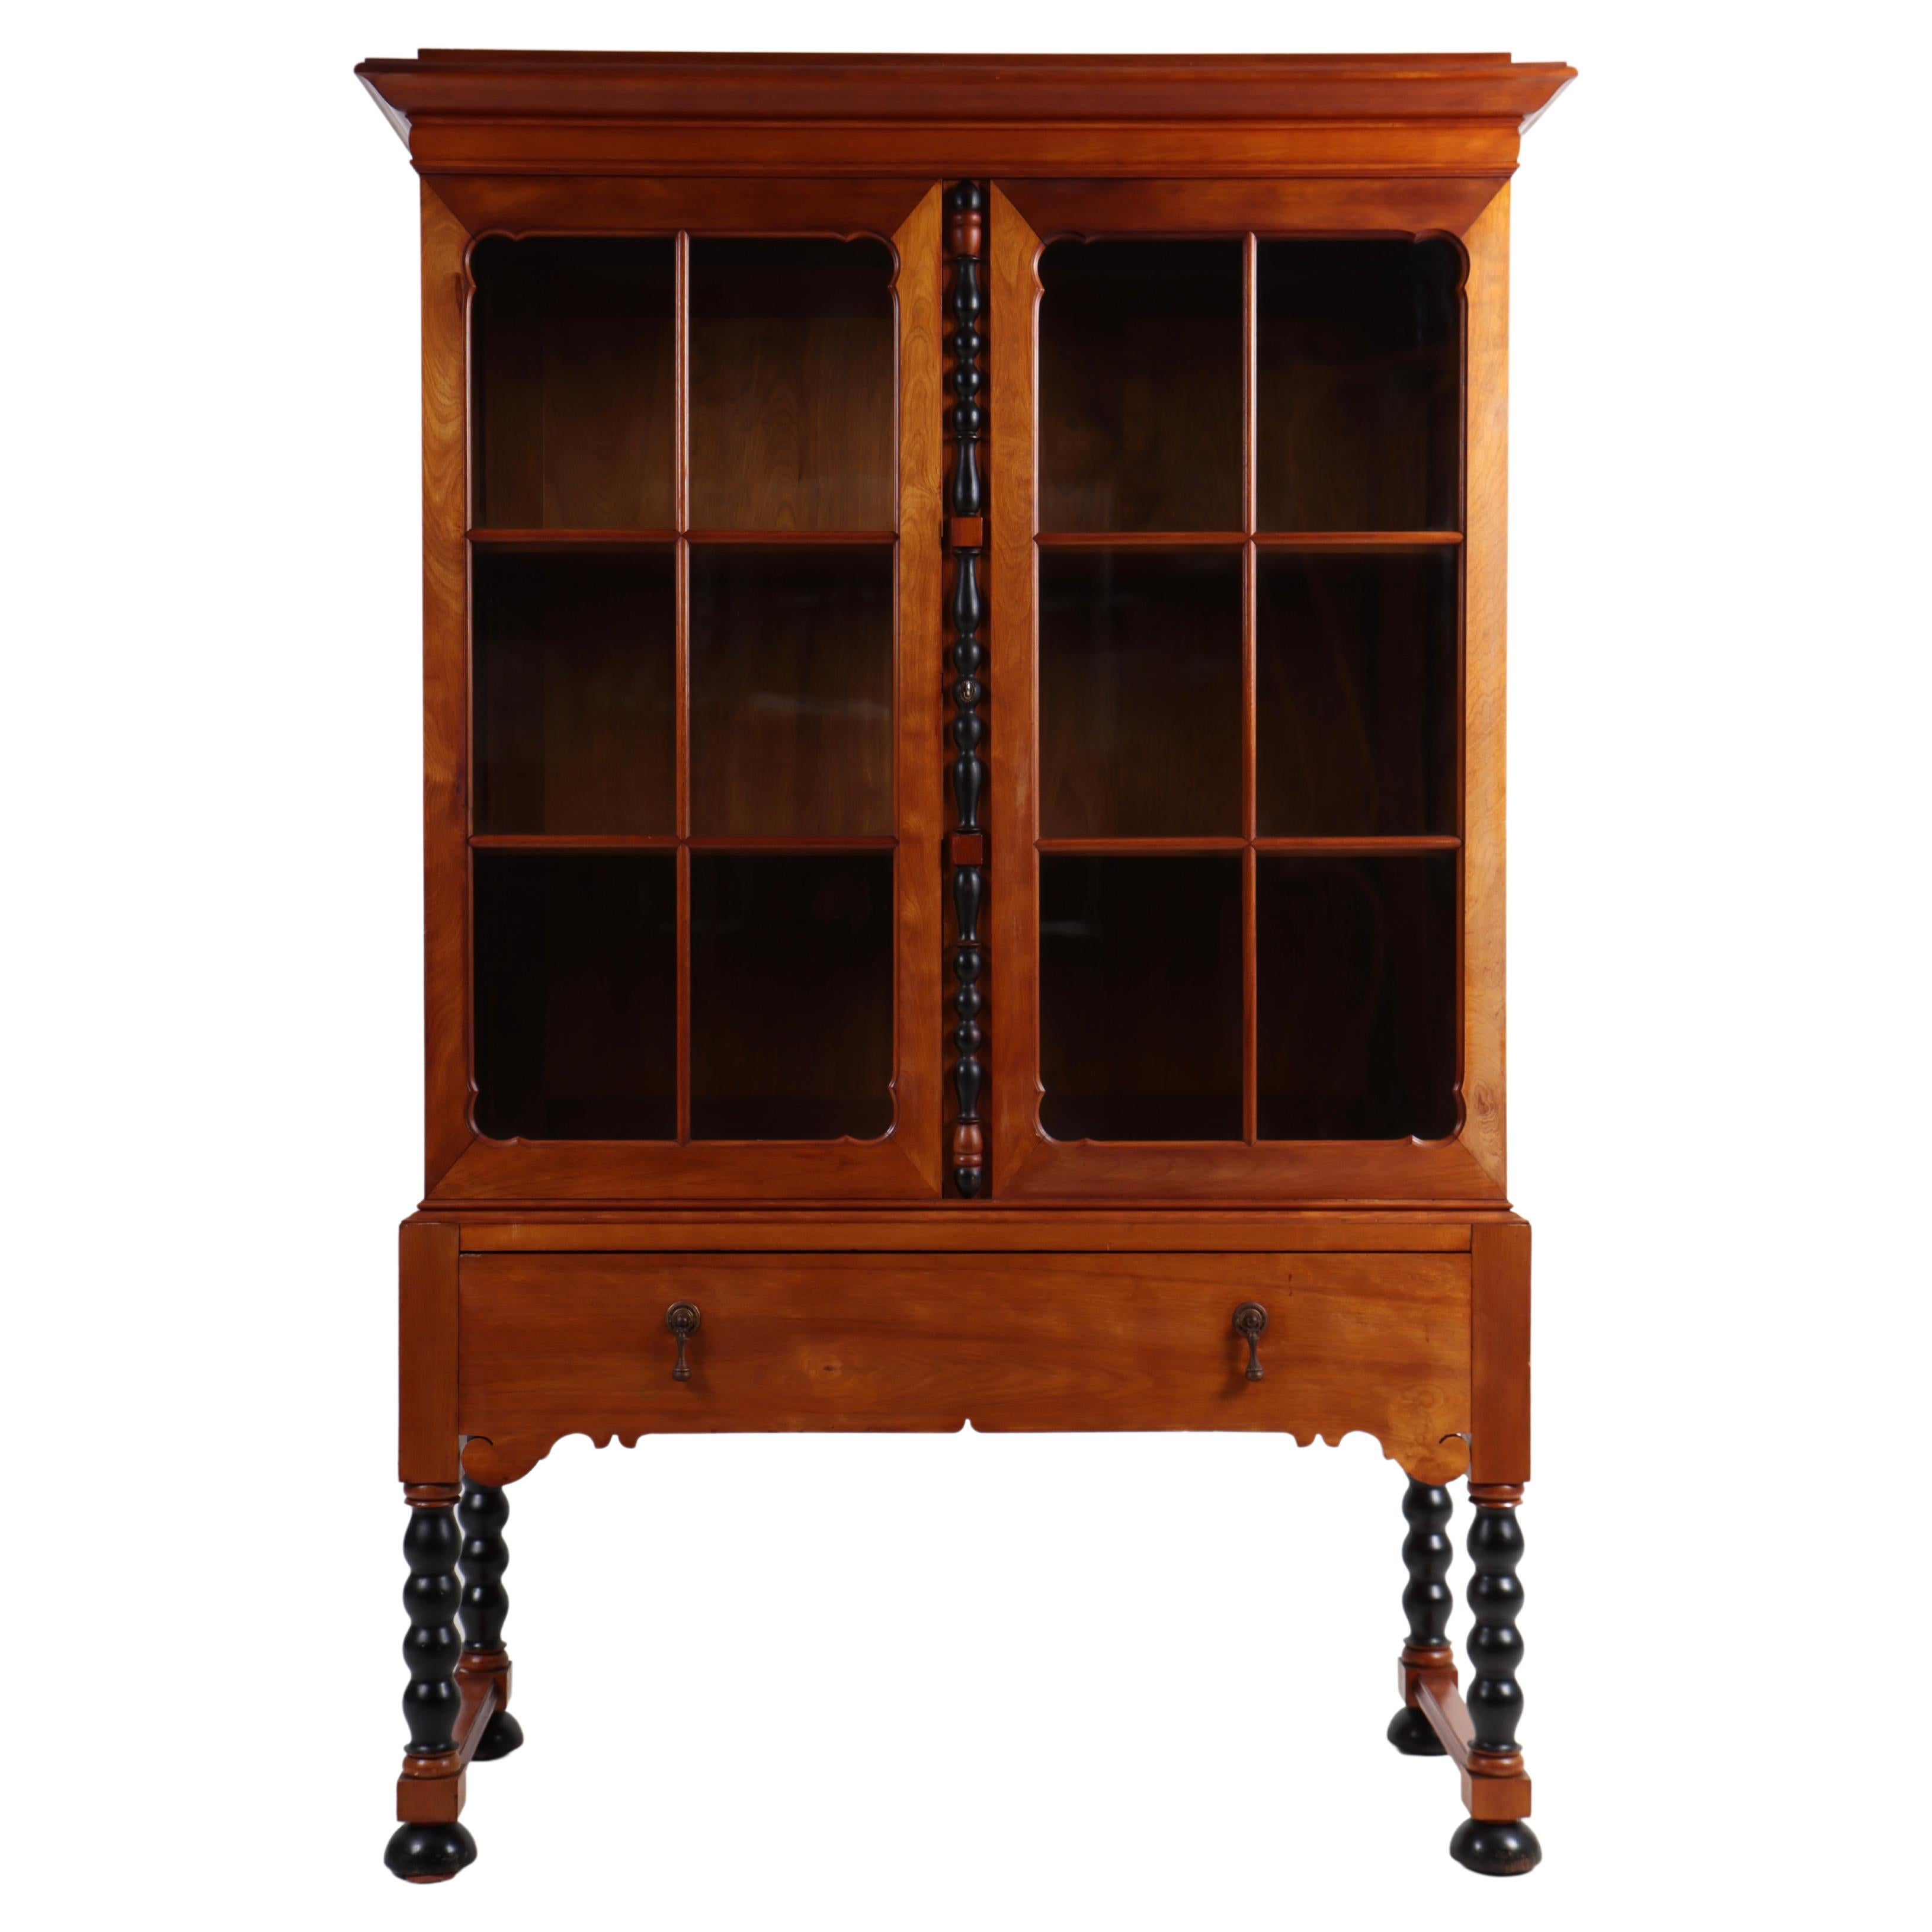 Display cabinet in walnut. Designed and made by Danish cabinetmaker. Great original condition.

